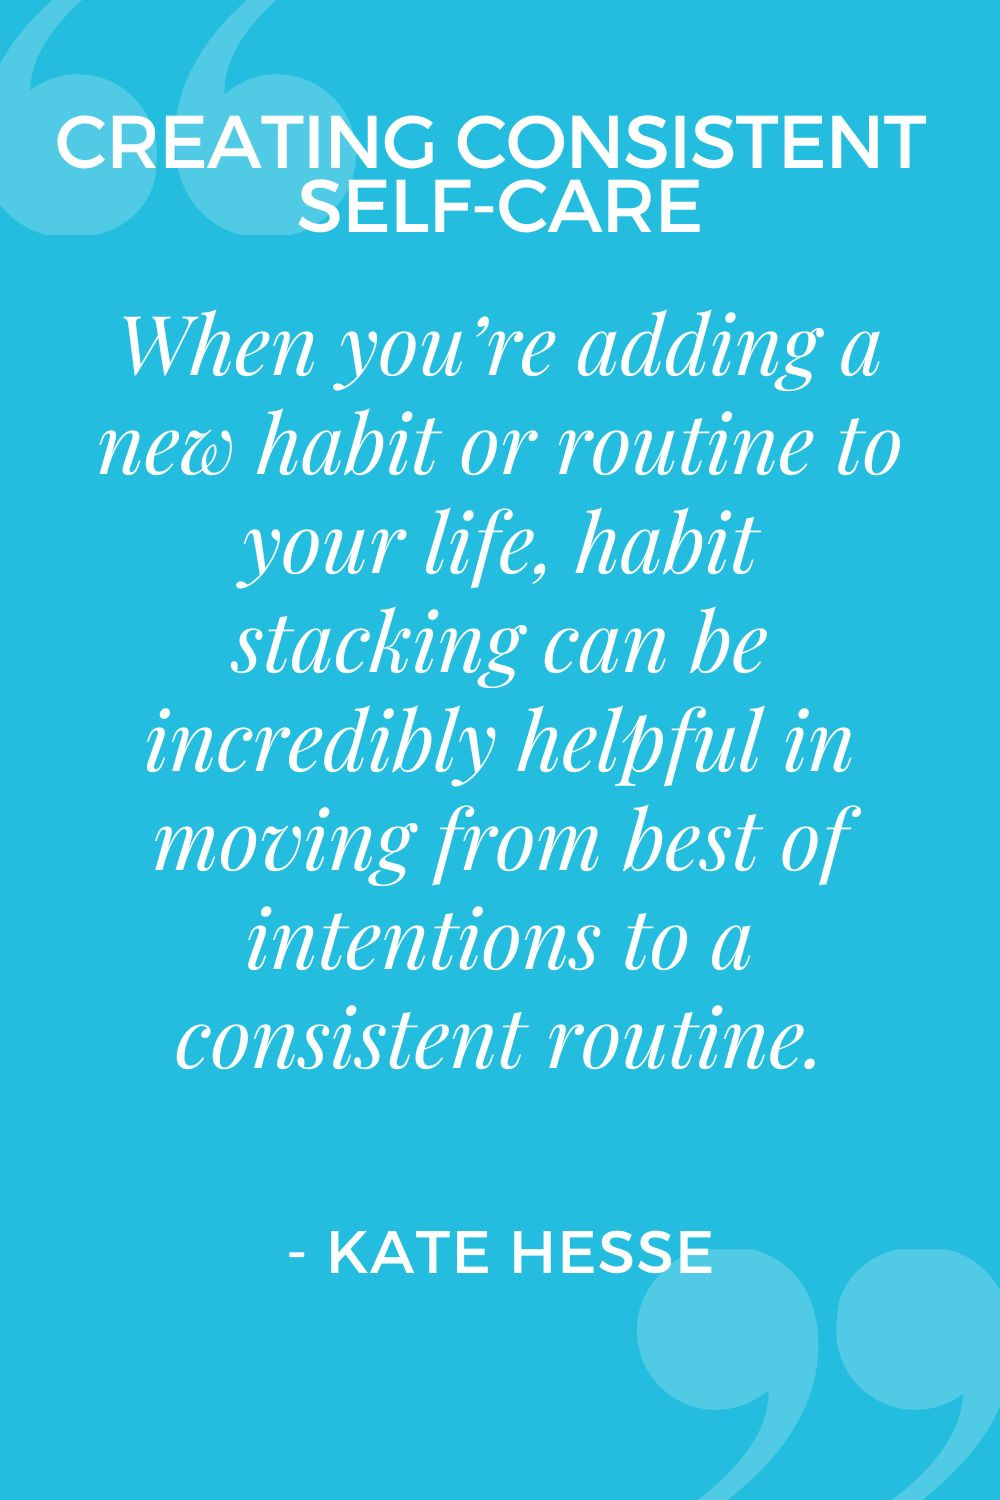 When you're adding a new habit or routine to your life, habit stacking can be incredibly helpful in moving from best of intentions to consistent routine.